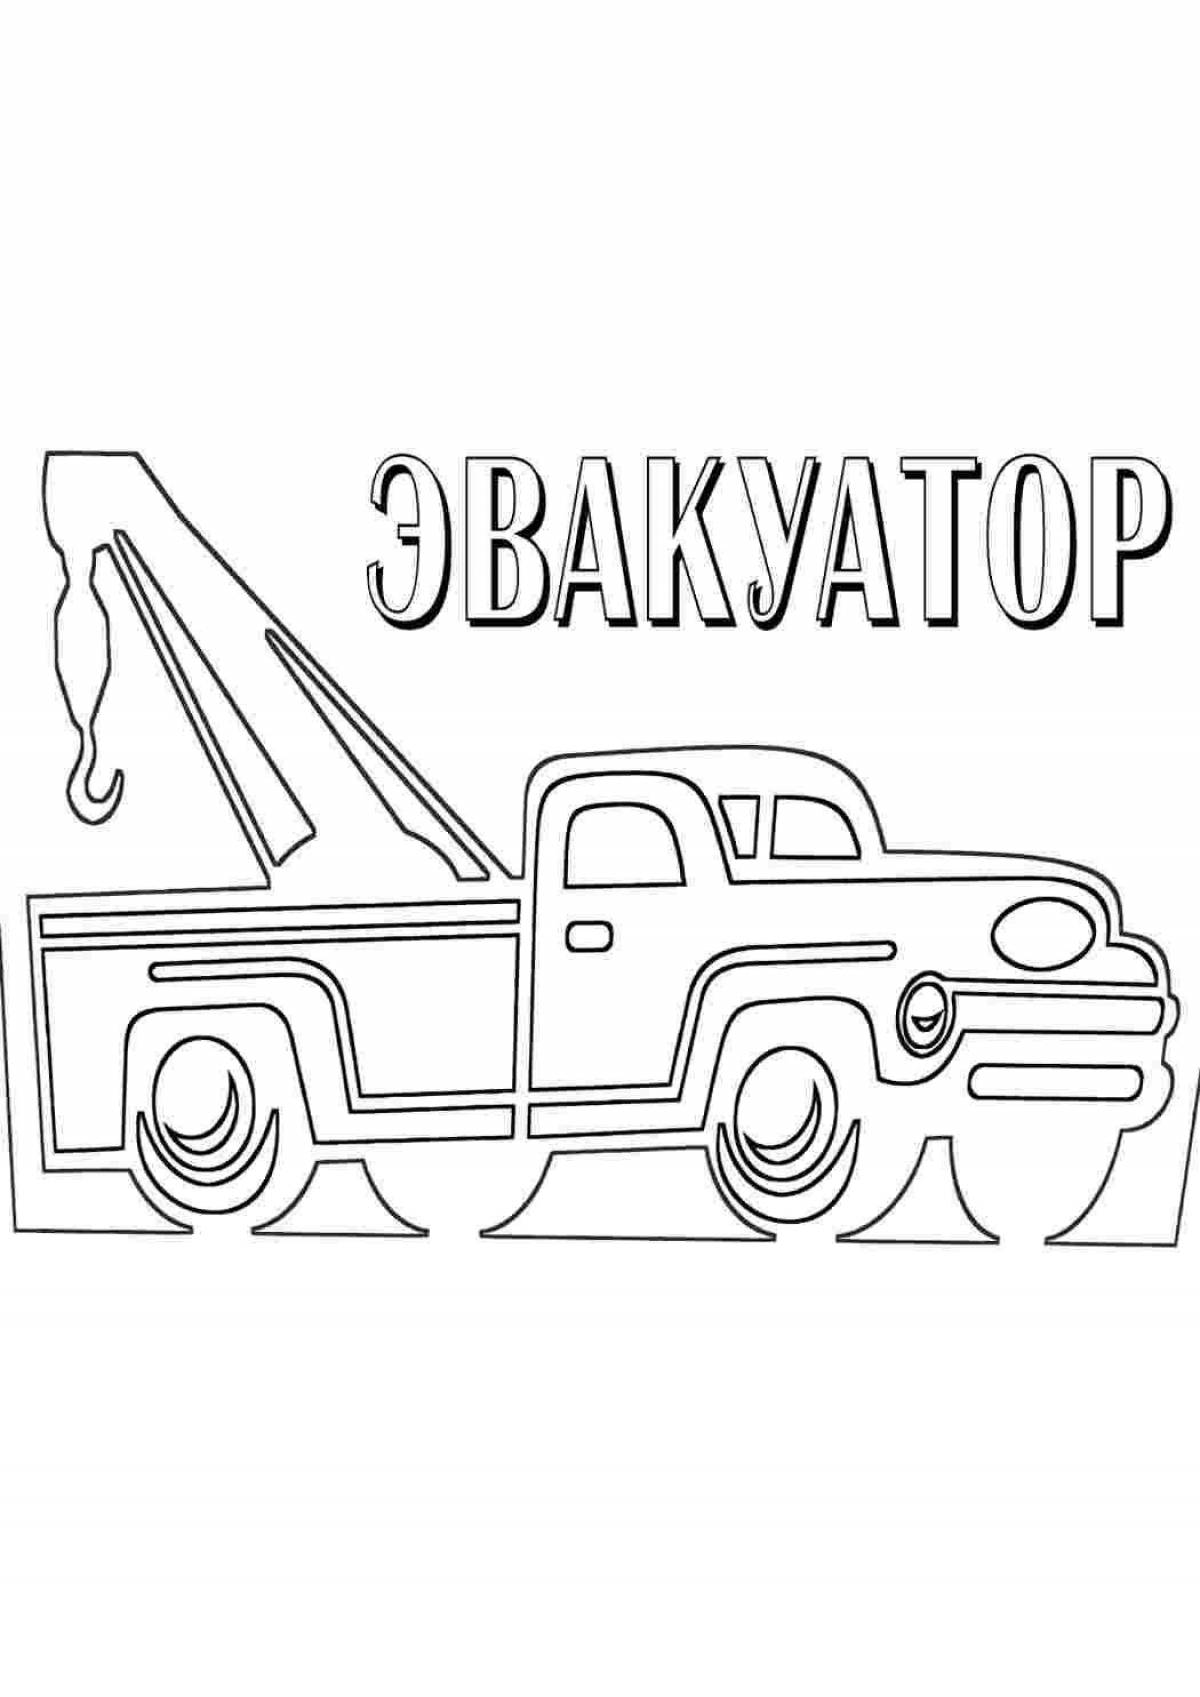 Sparkly tow truck coloring book for kids